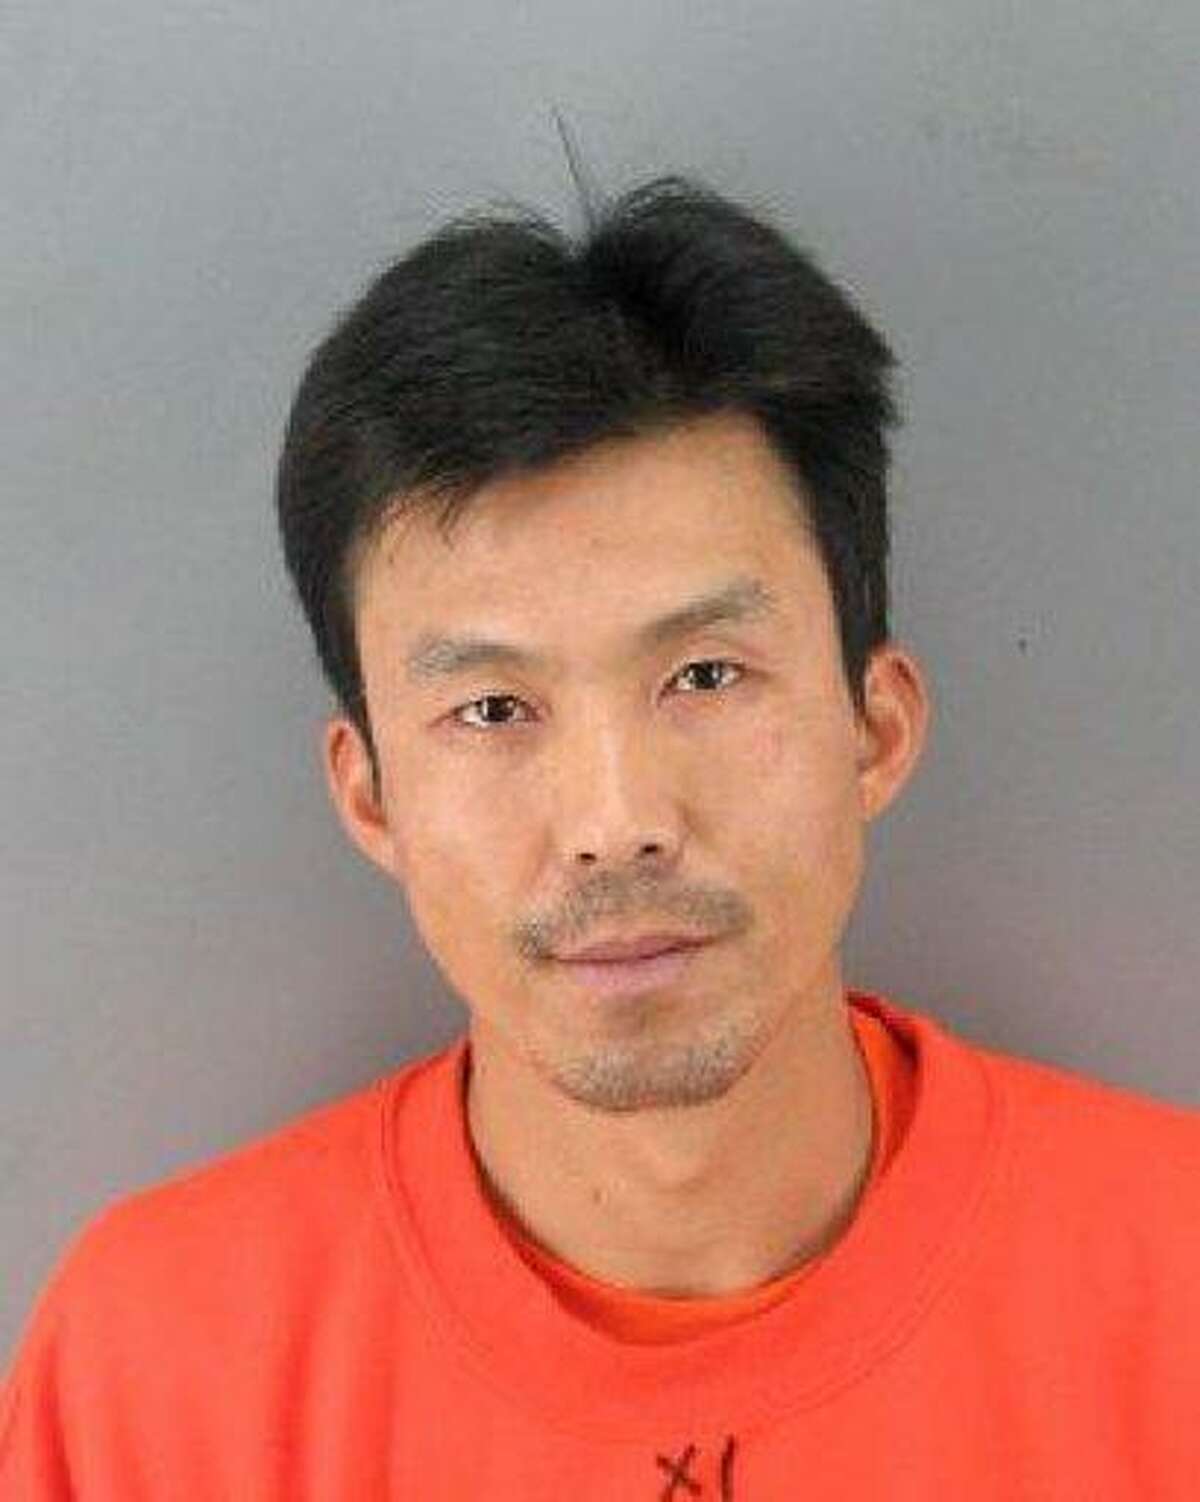 FILE-- This booking photo provided by the San Francisco Police Dept. shows Binh Thai Luc, who was arrested Sunday, March 25 2012 and was charged with five counts of murder.